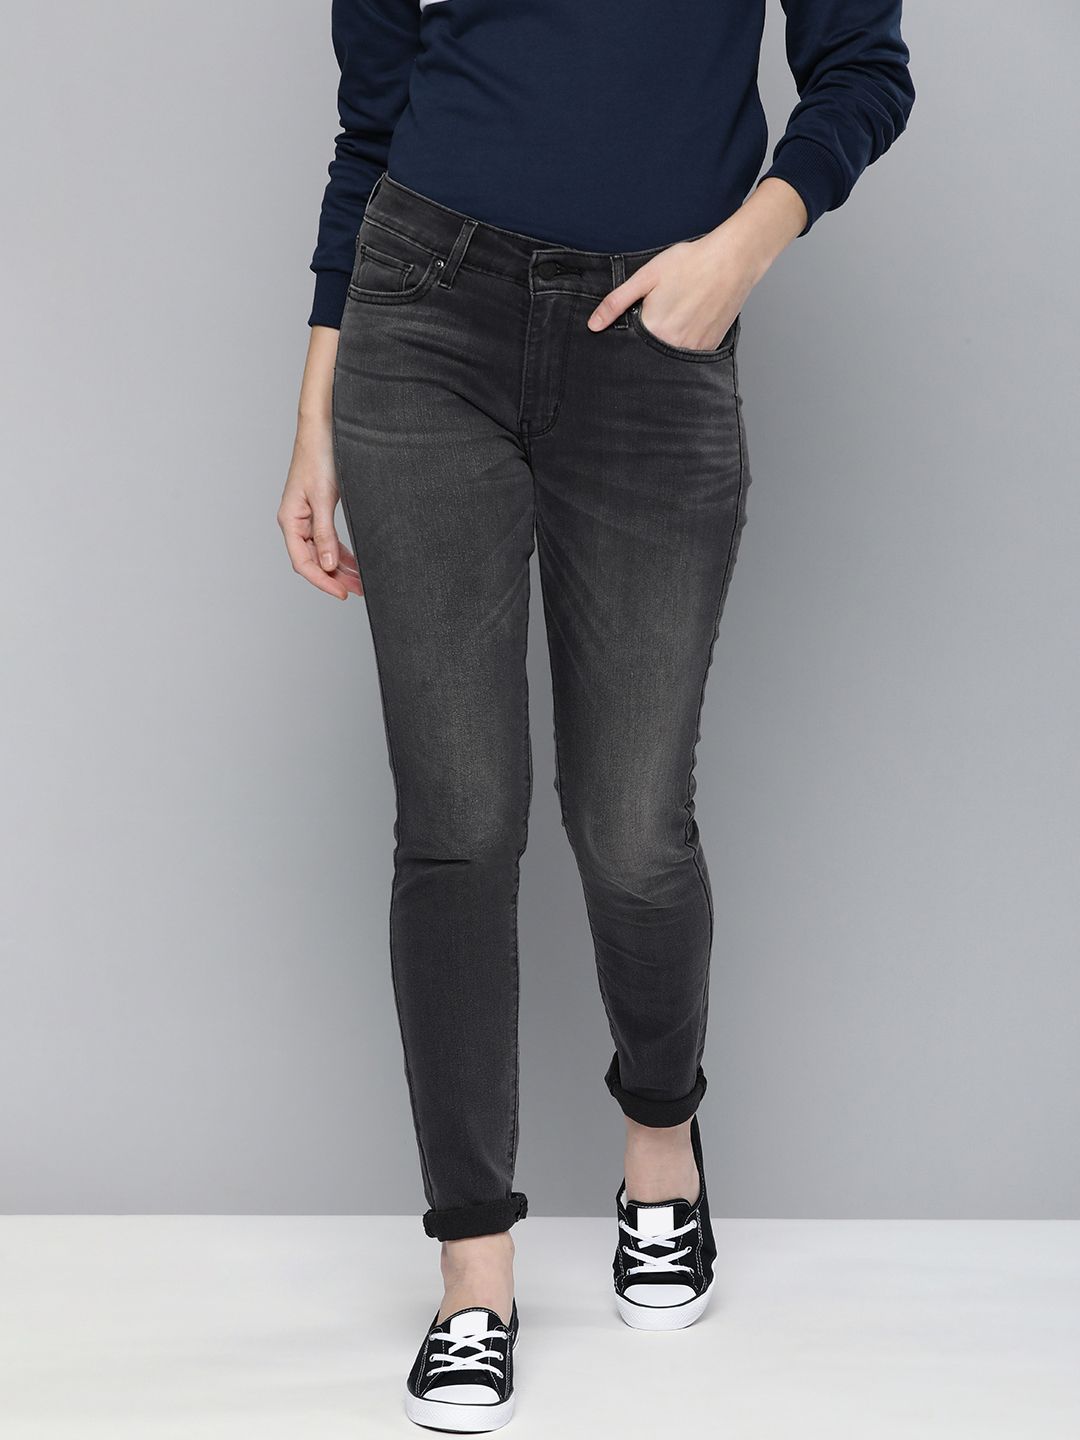 Levis Women Black 711 Skinny Fit Light Fade Stretchable Jeans Price in India